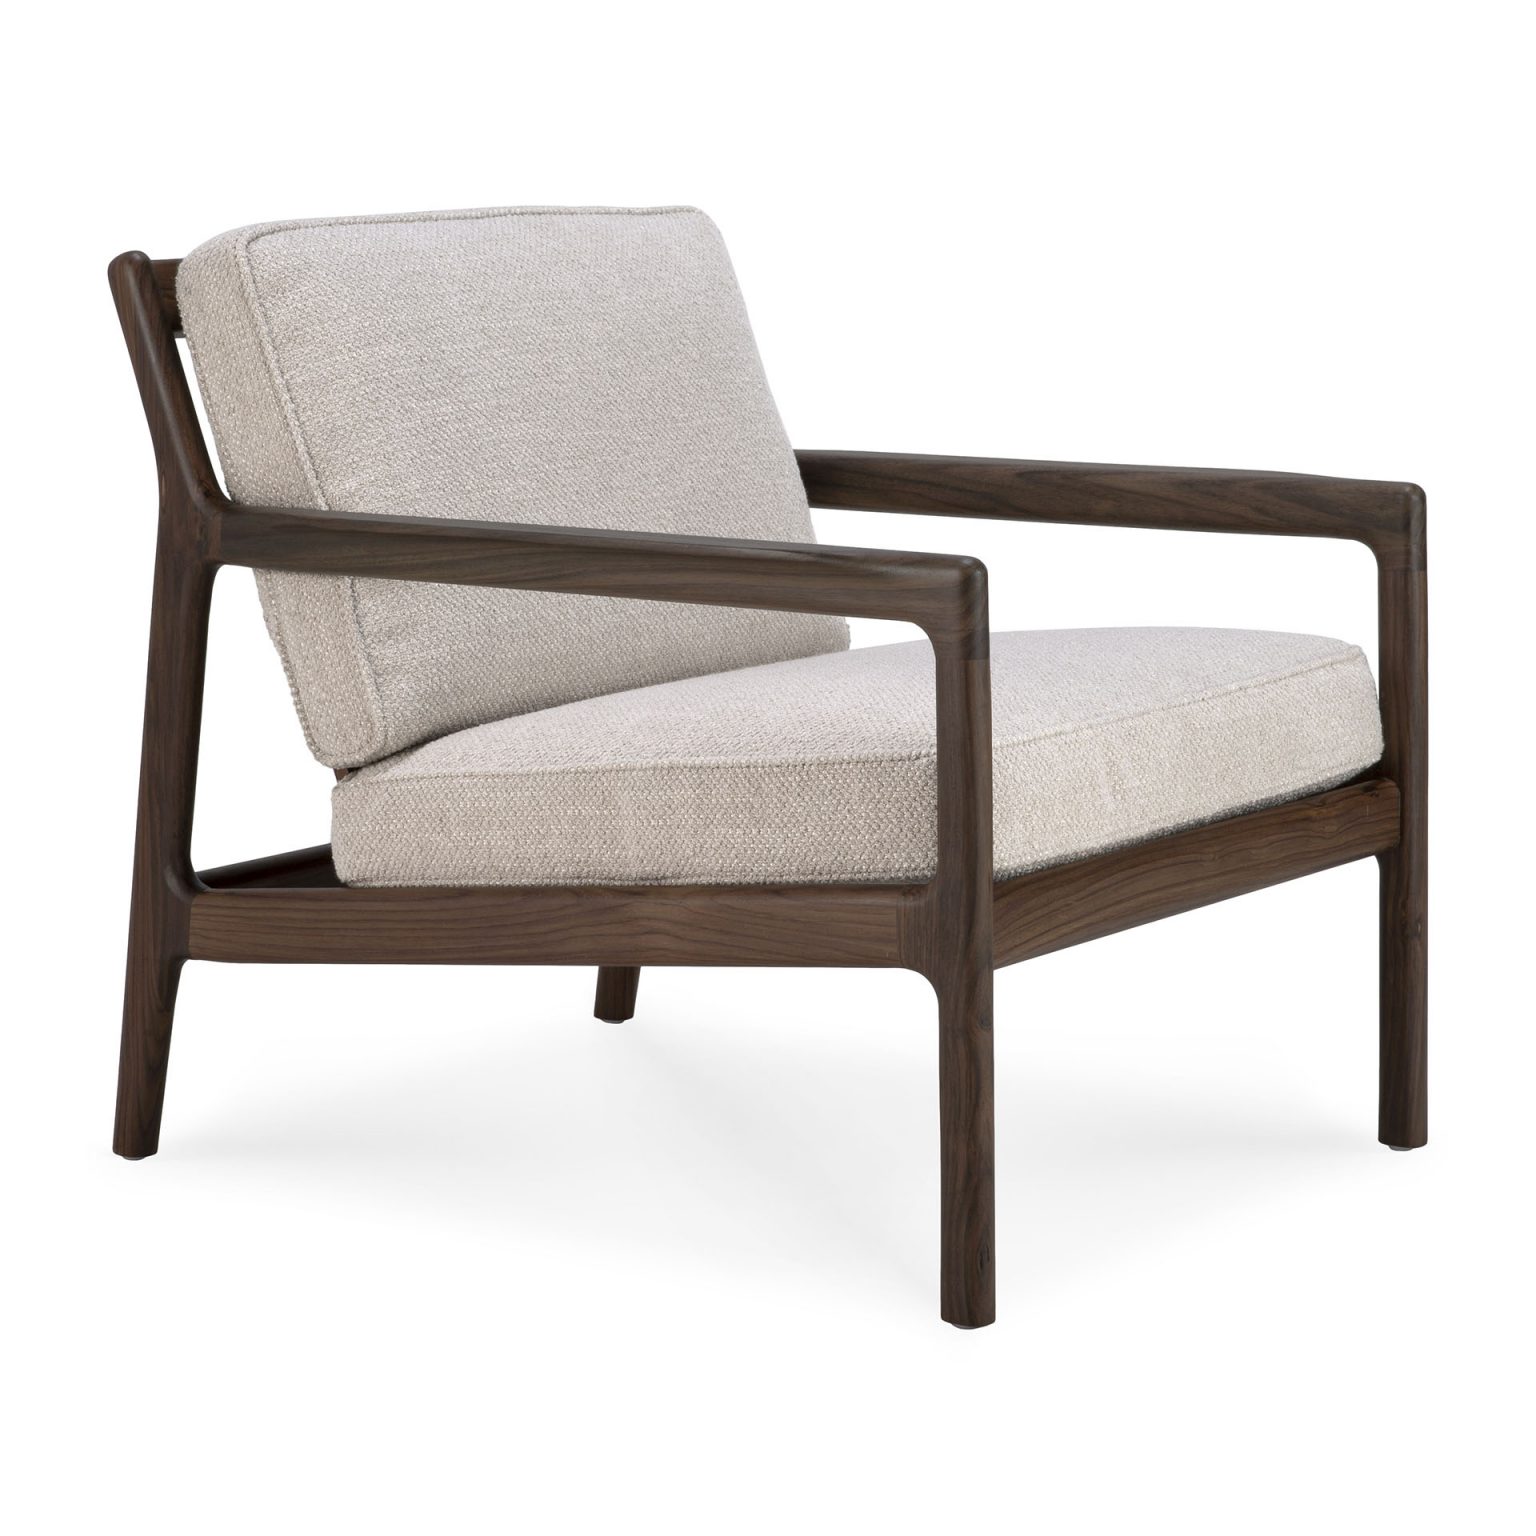 Biennale Interieur - Belgium's leading design and interior event - 35200_rosewood_jack_lounge_chair_ivory_side_cut_web.jpg